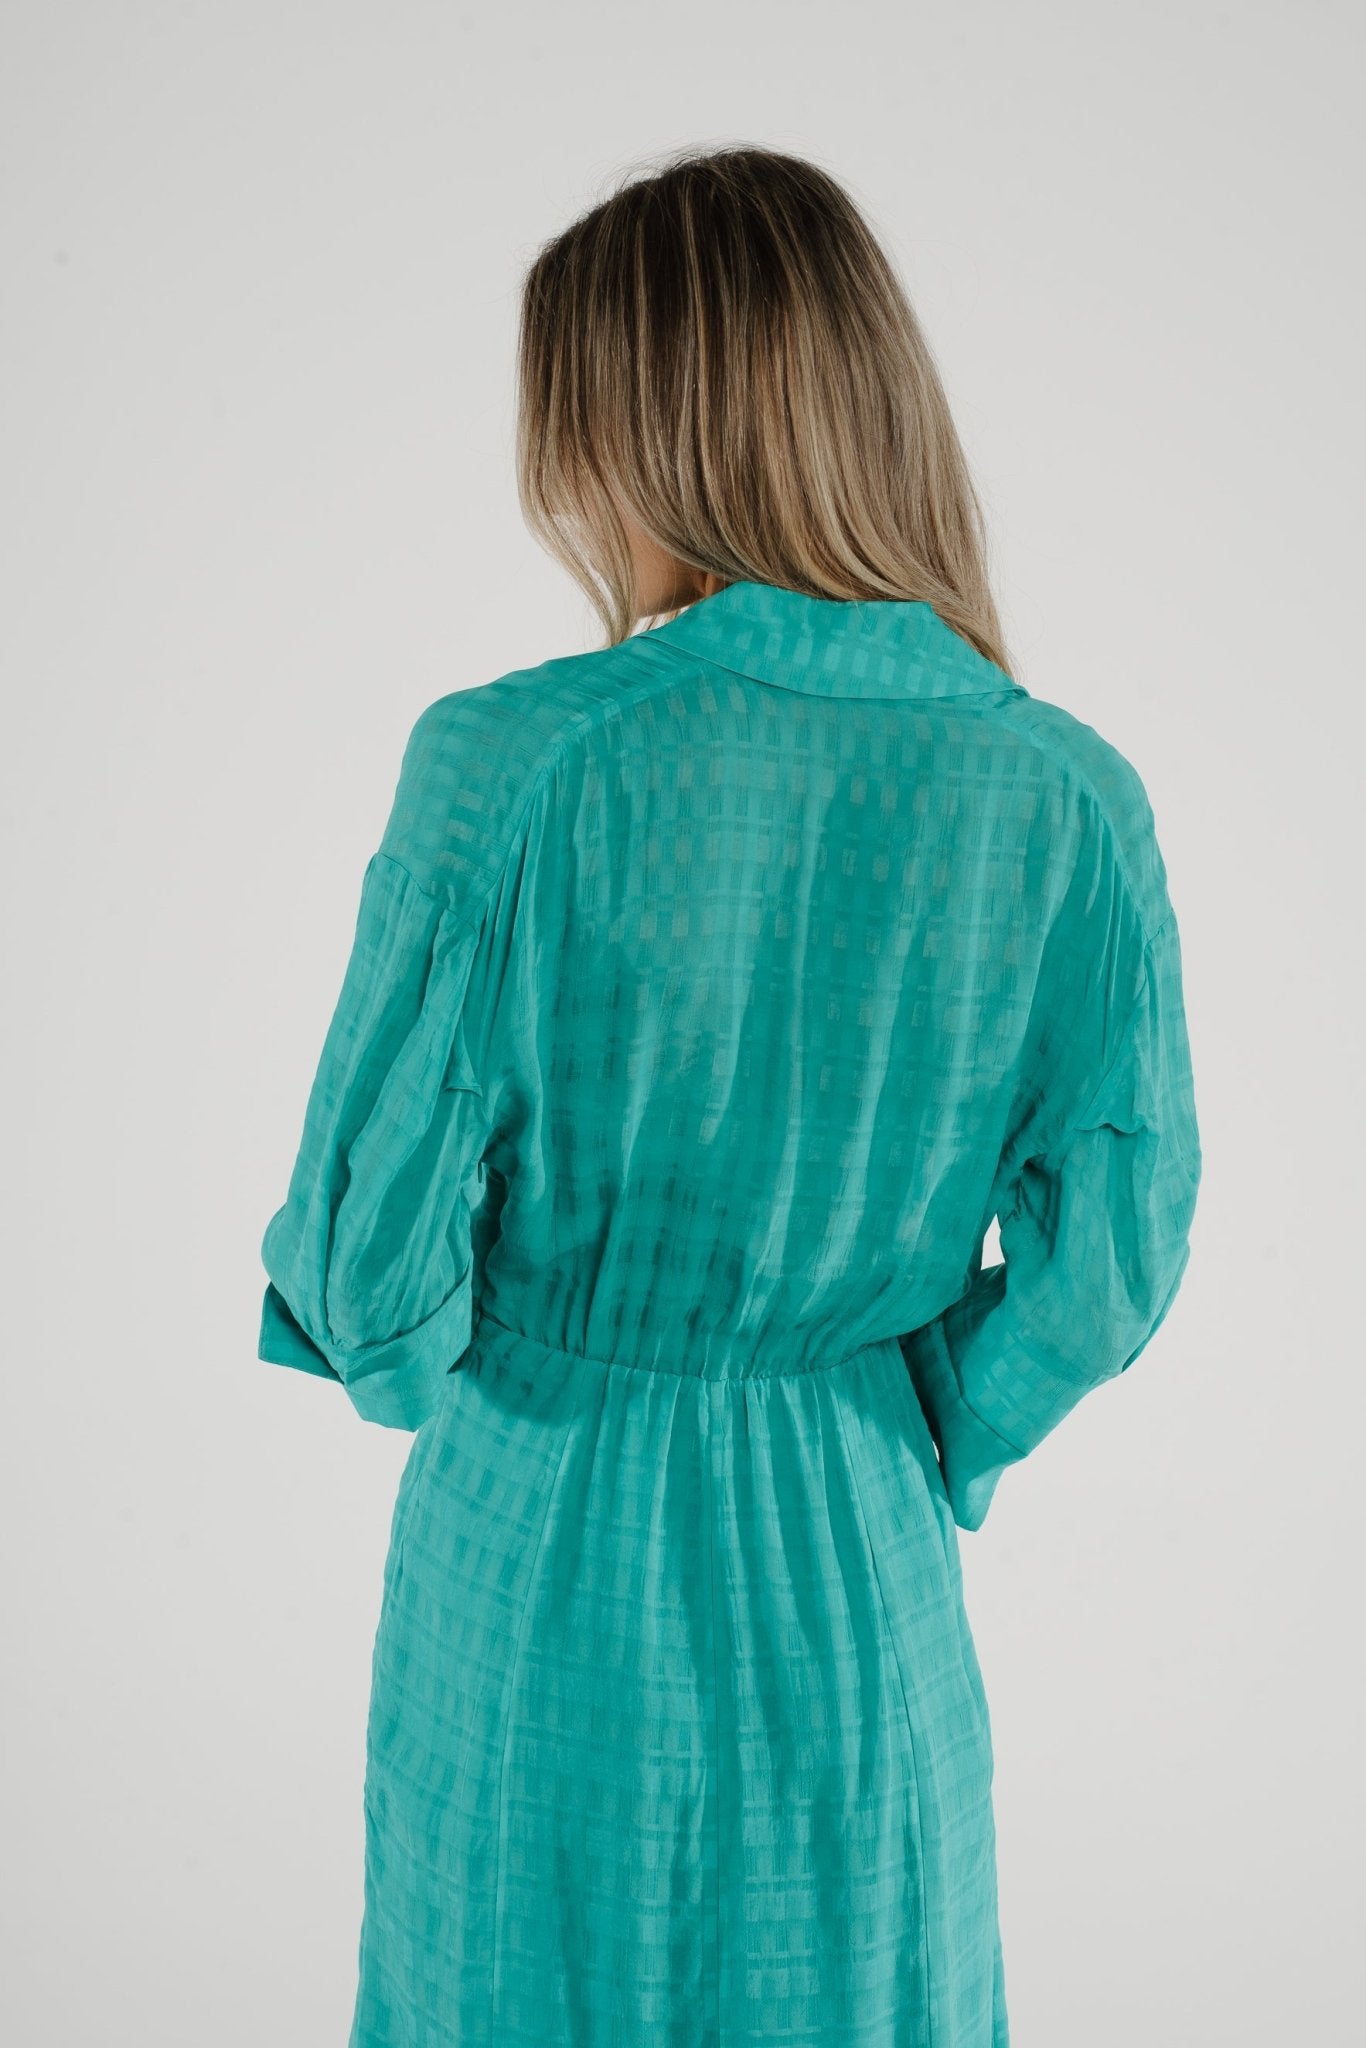 Kayla Button Front Dress In Turquoise - The Walk in Wardrobe